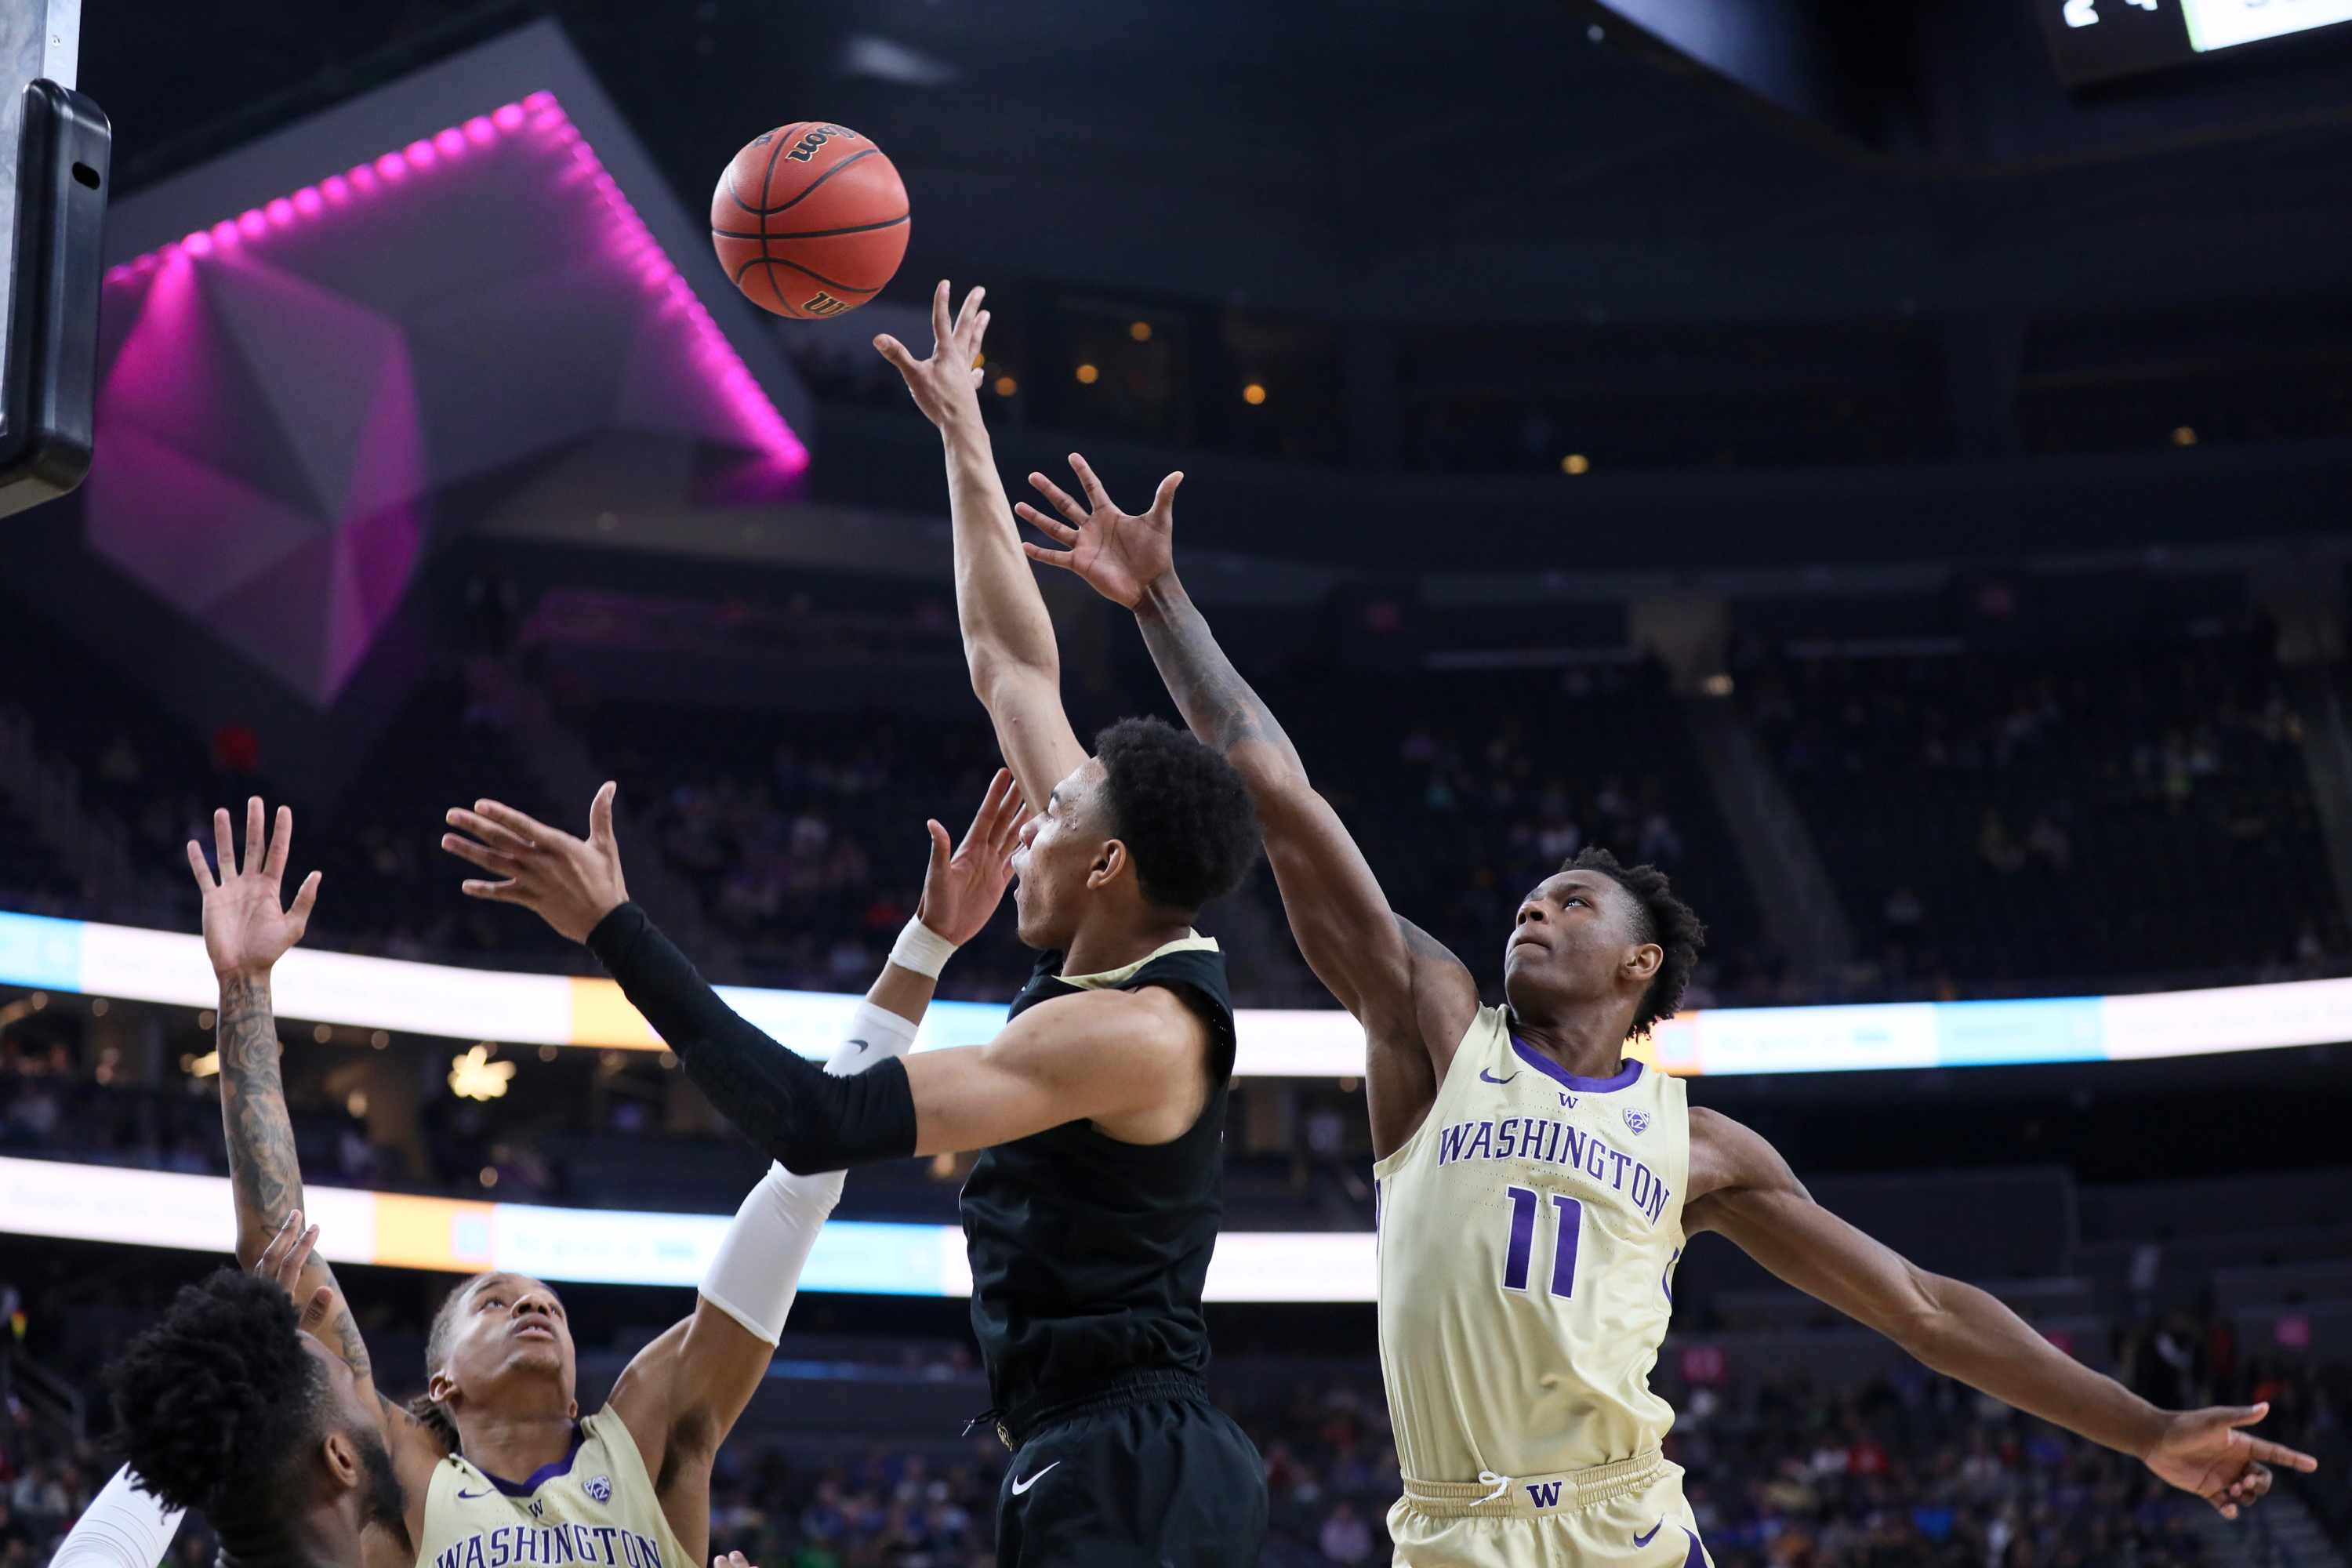 Ice-cold second half dooms Buffs in Pac-12 Tourney semis against UW